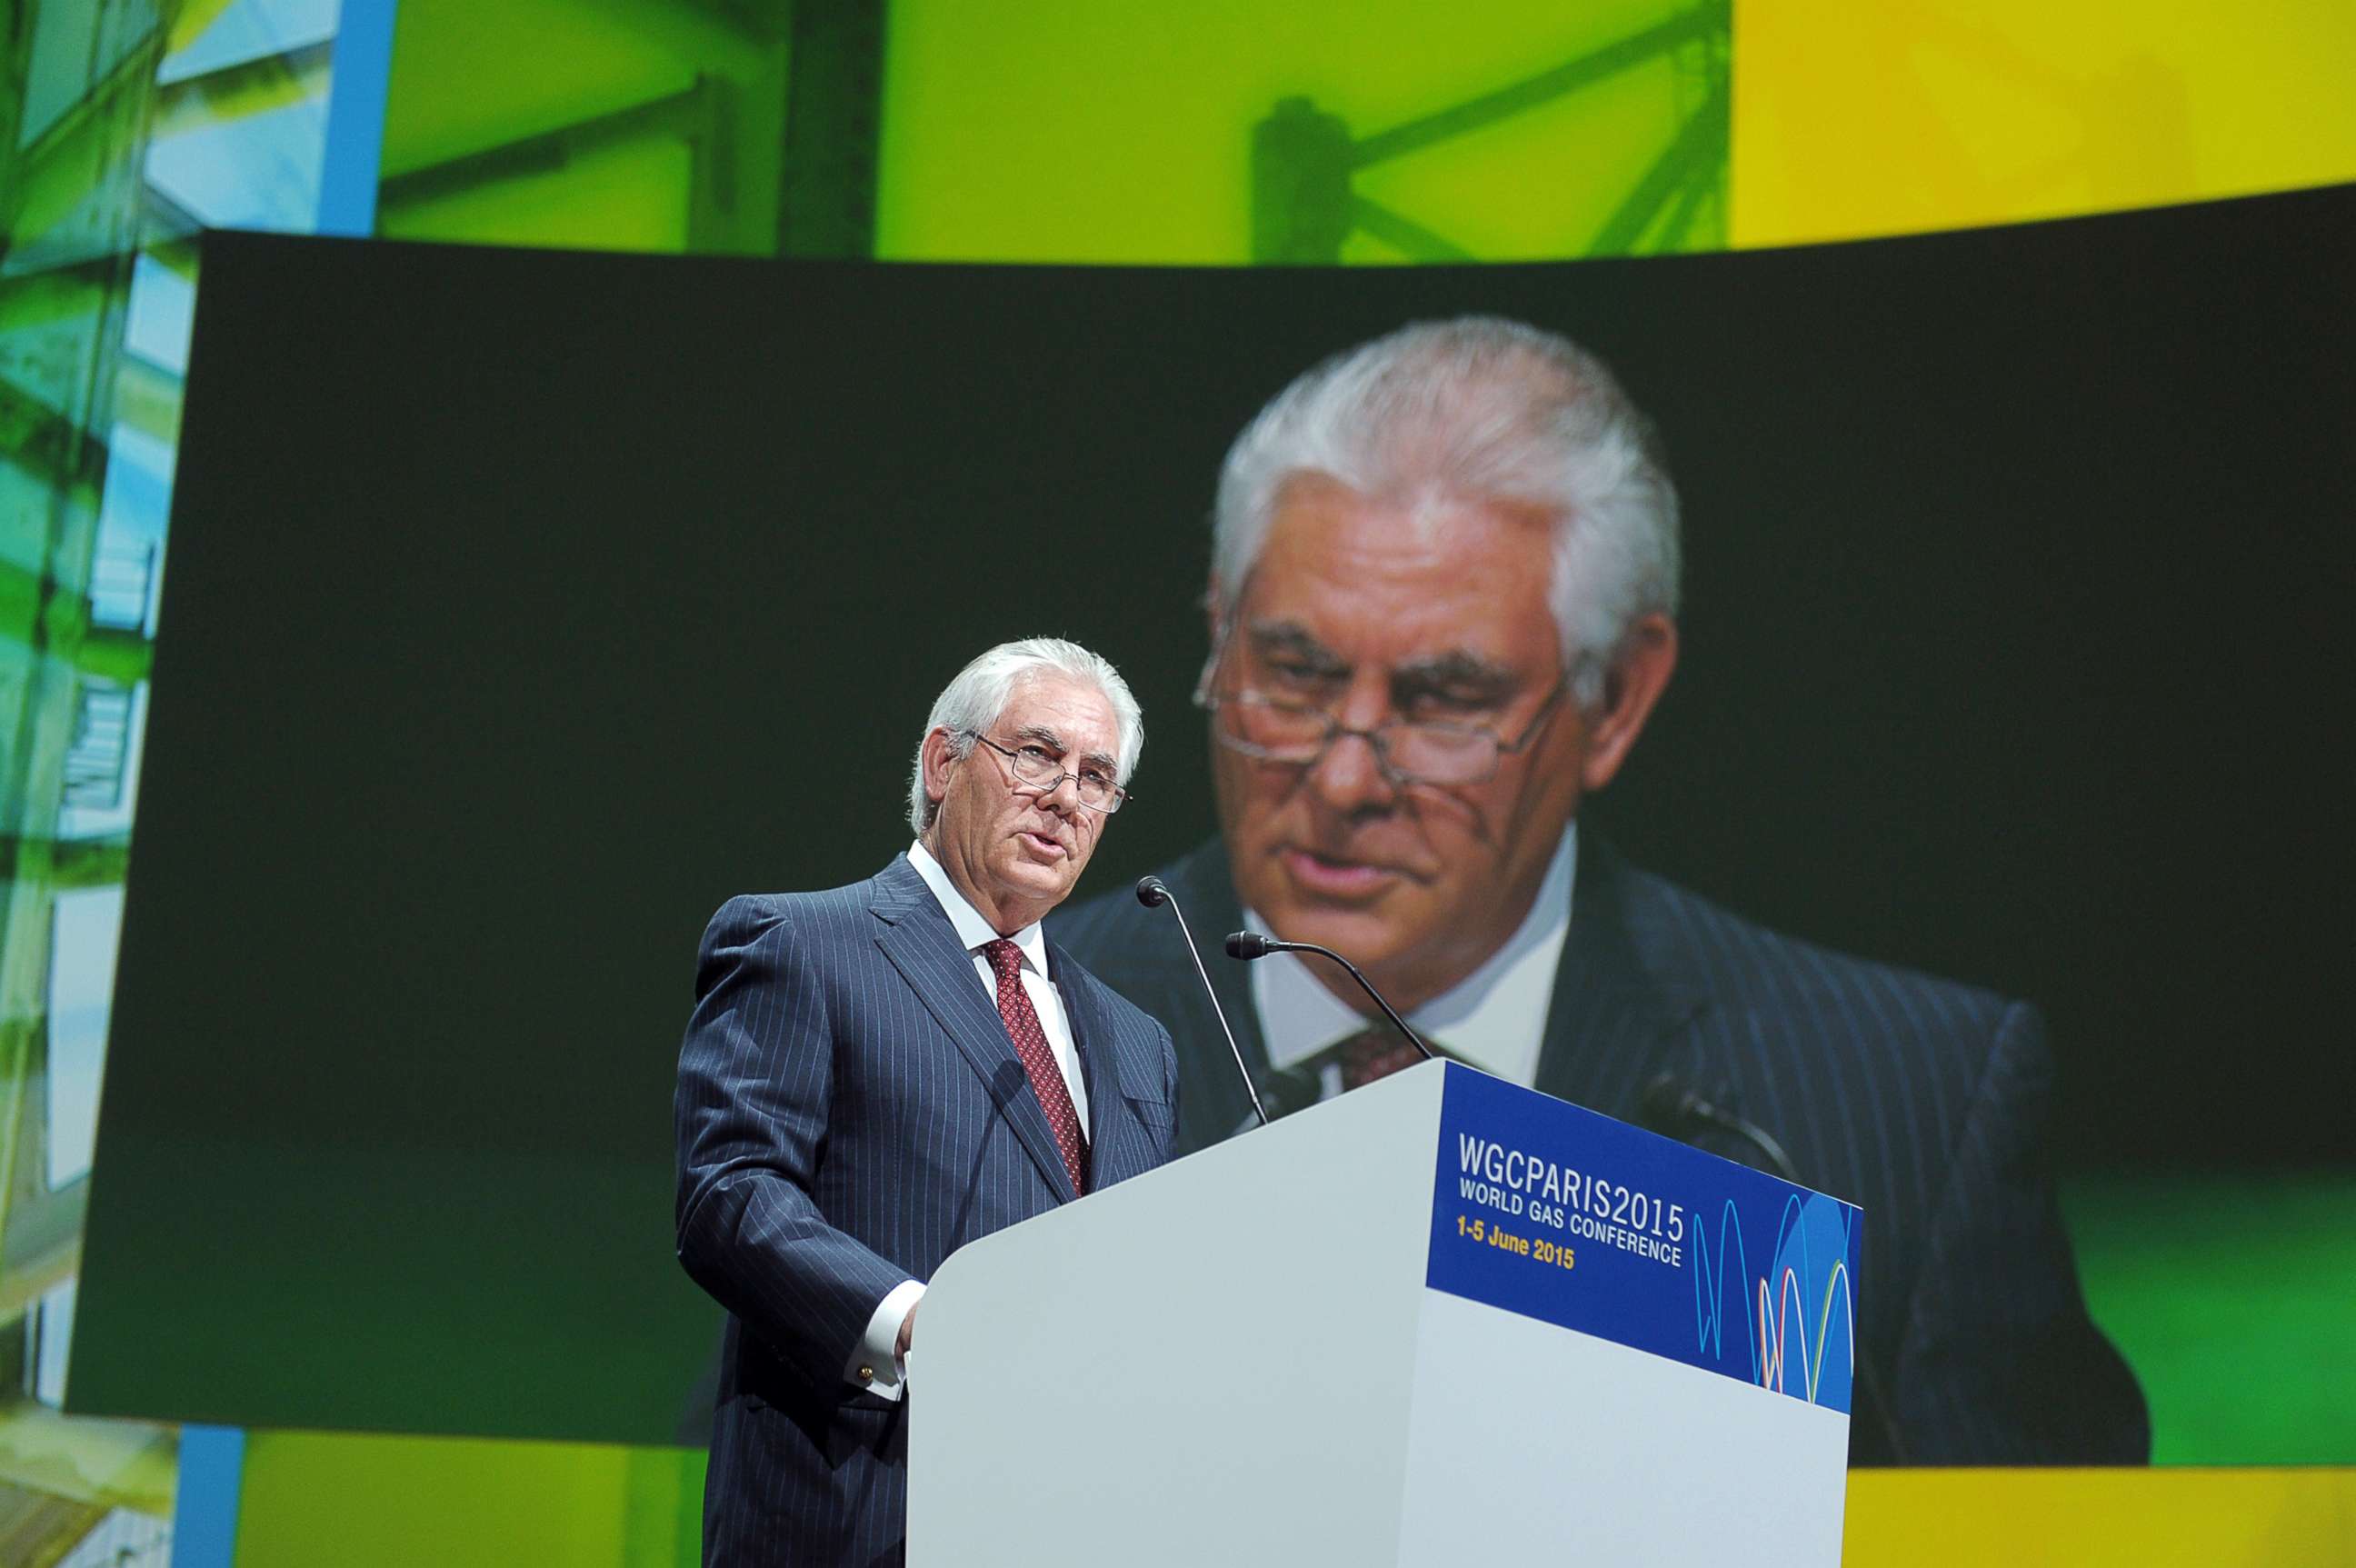 PHOTO: Exxon Mobil Chairman and CEO Rex Tillerson addresses a keynote speech during the World Gas Conference in Paris on June 2, 2015.